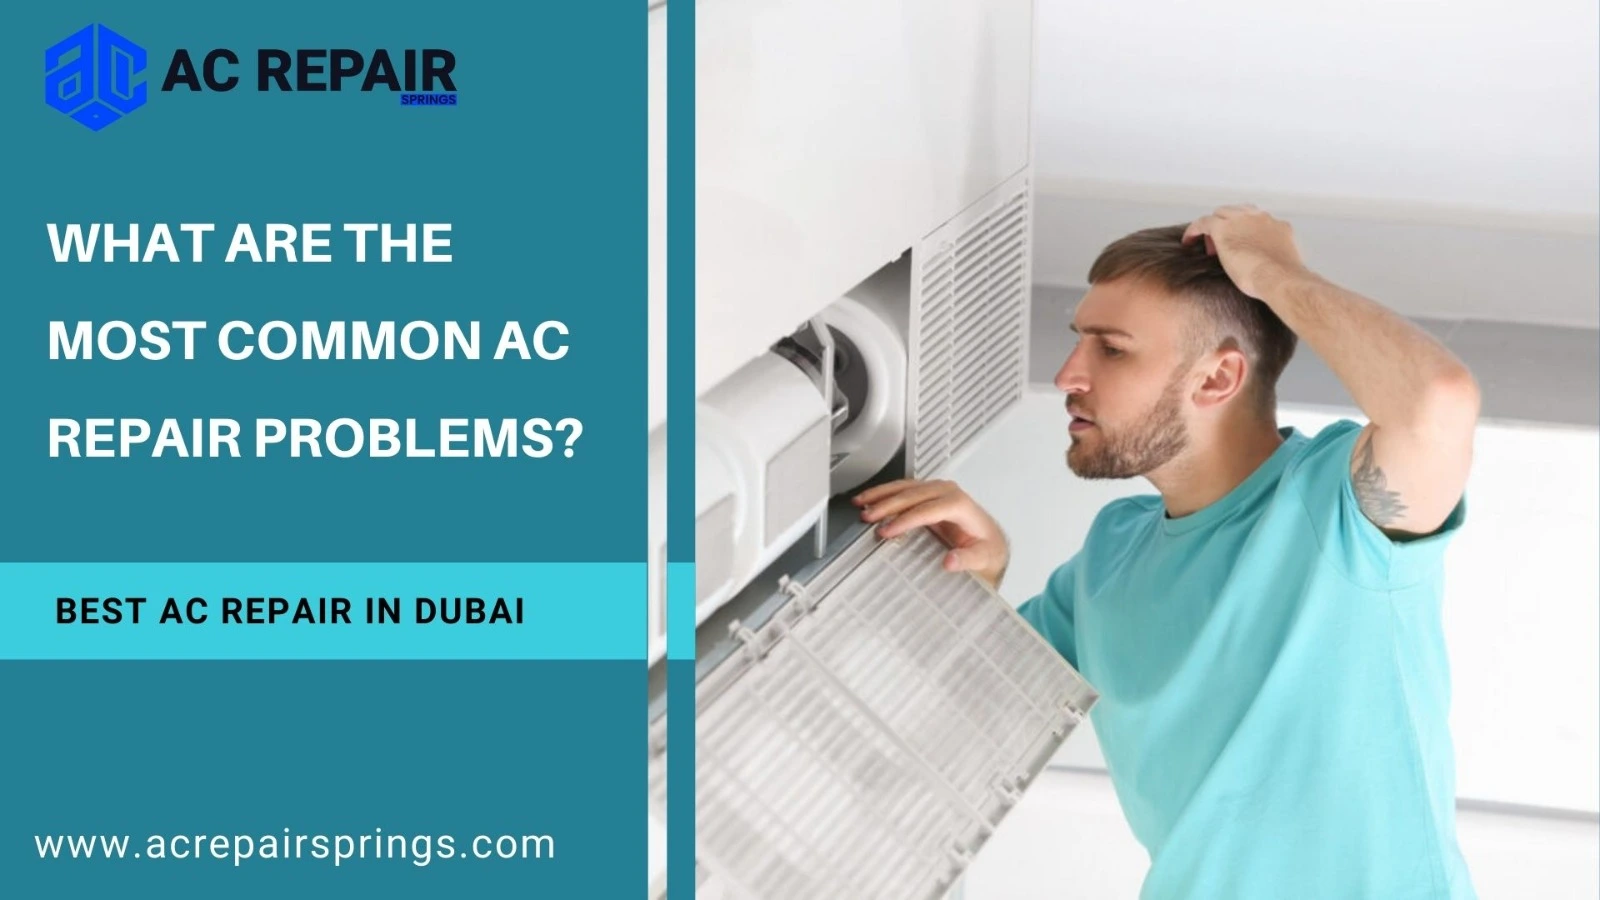 What Are The Most Common AC Repair Problems?